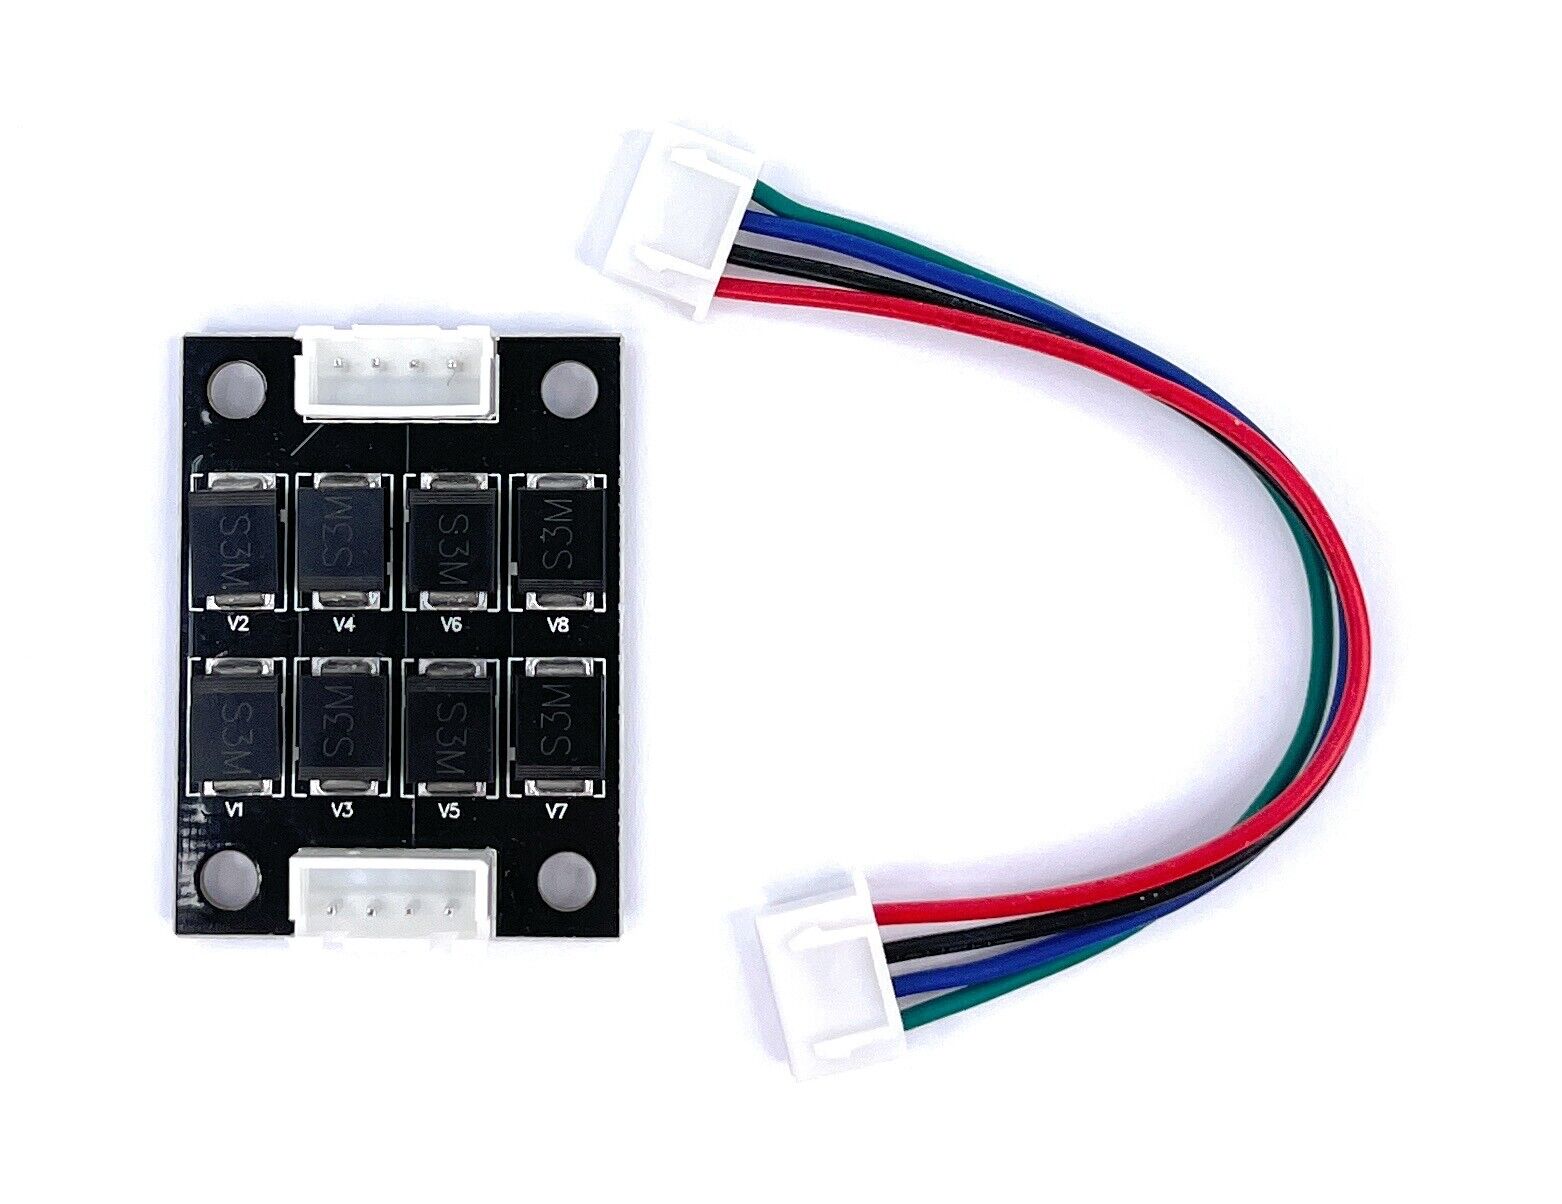 3D Printer TL Smoother for Stepper Motor Compatible with DRV8825 & A4998 Drivers